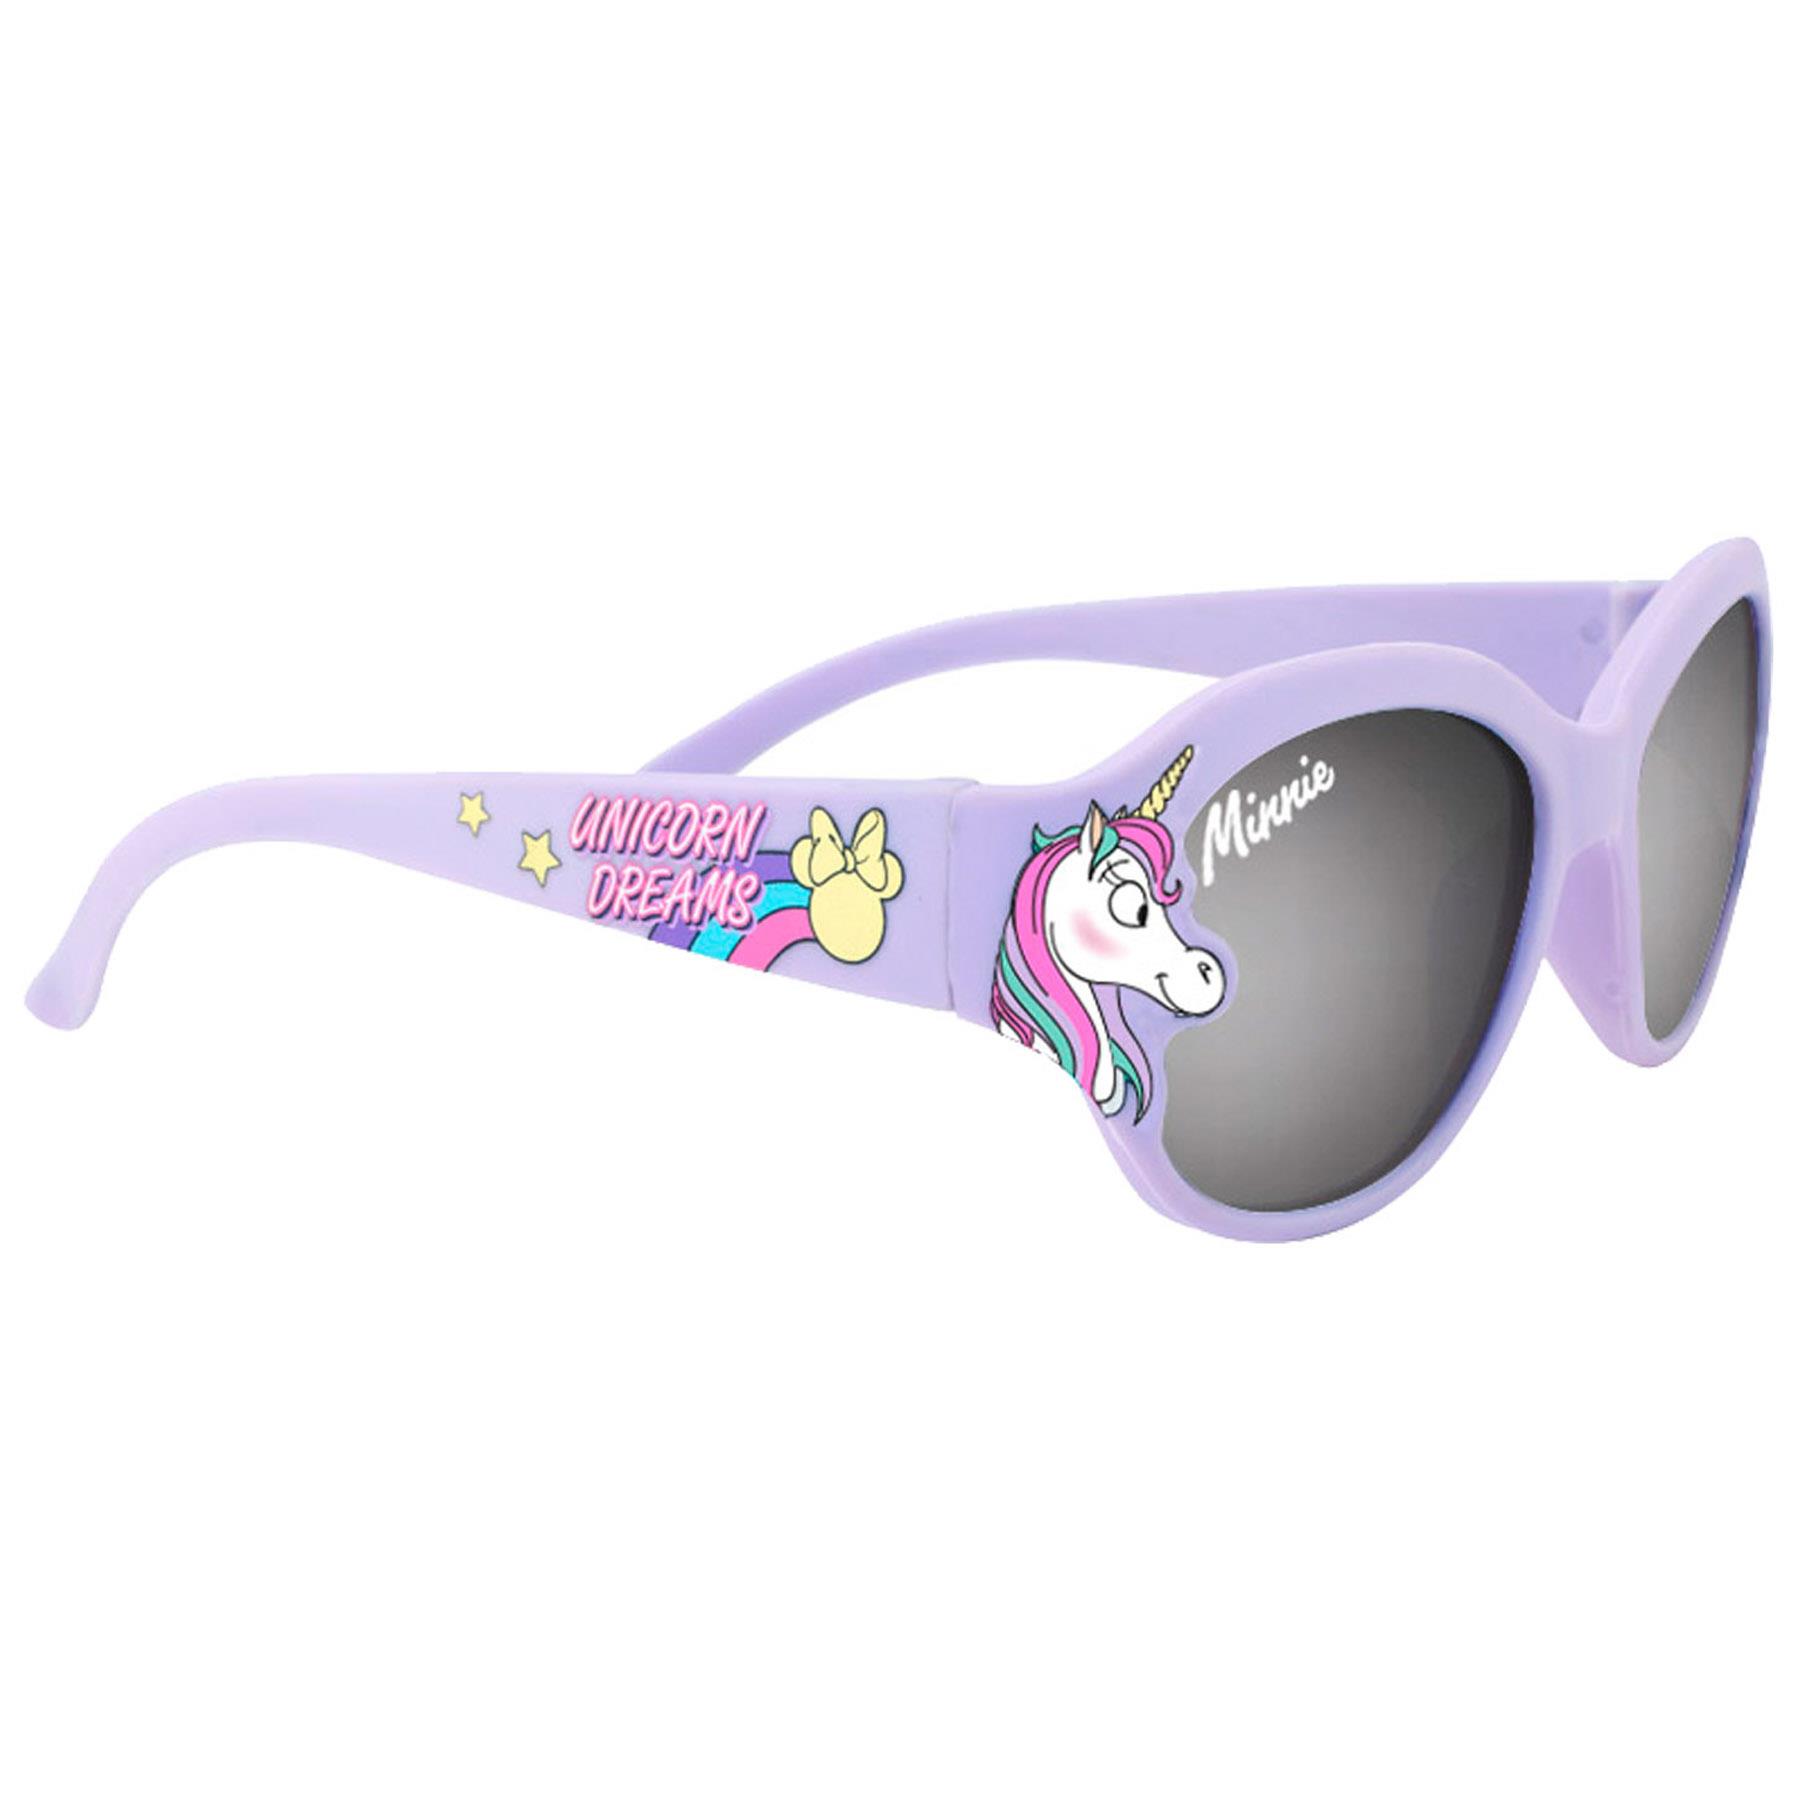 Disney Minnie Mouse Children's Sunglasses UV protection for Holiday - MIN31